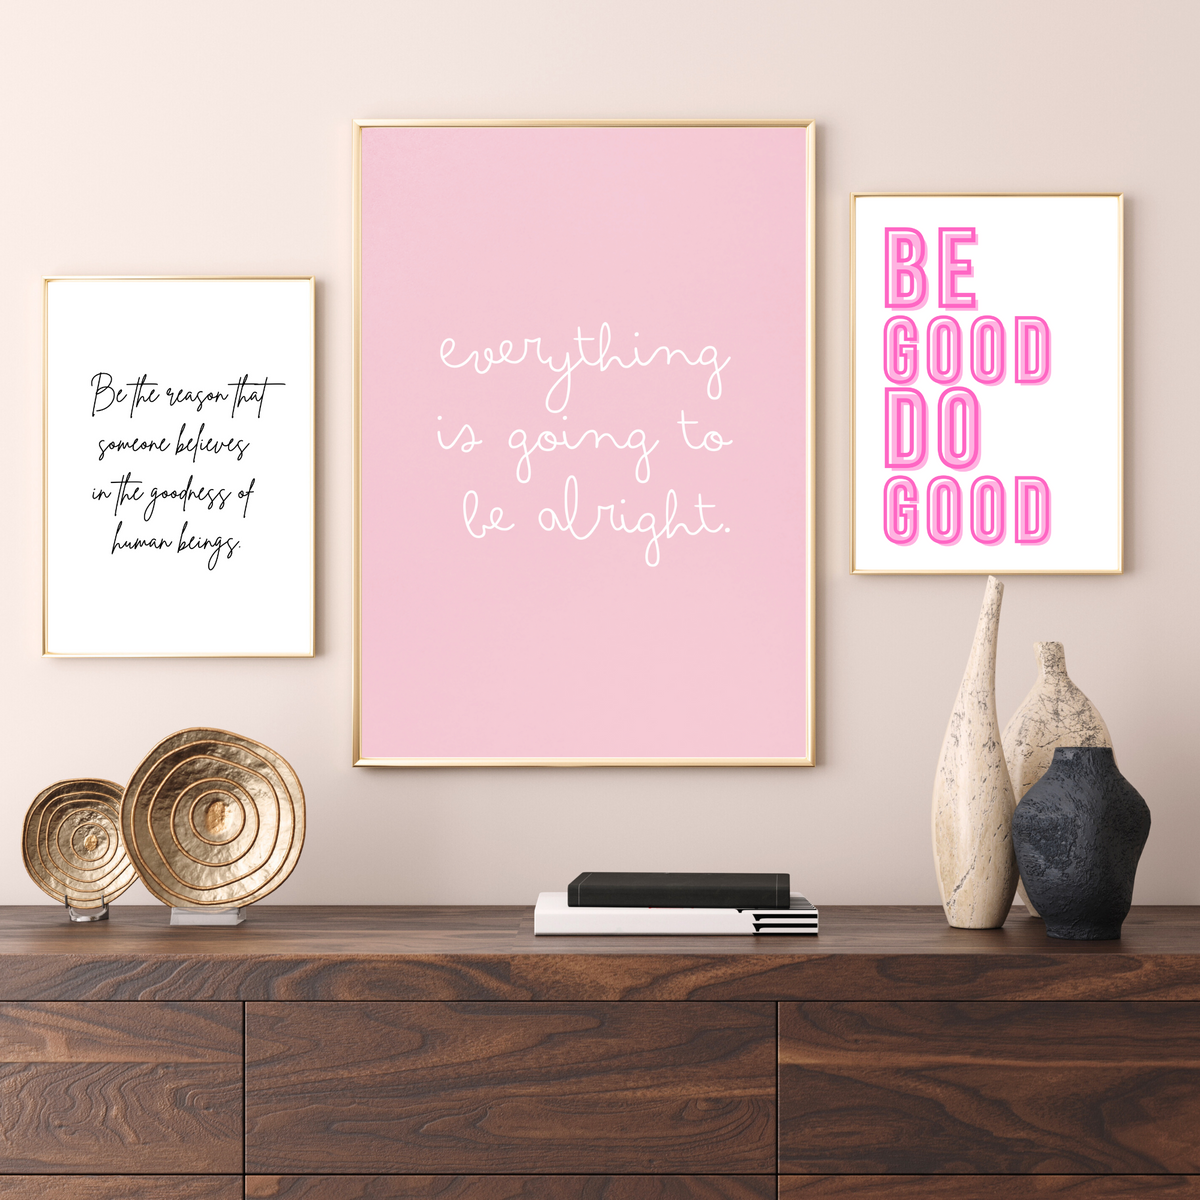 How to Get Free Wall Art Prints | Wattle Designs